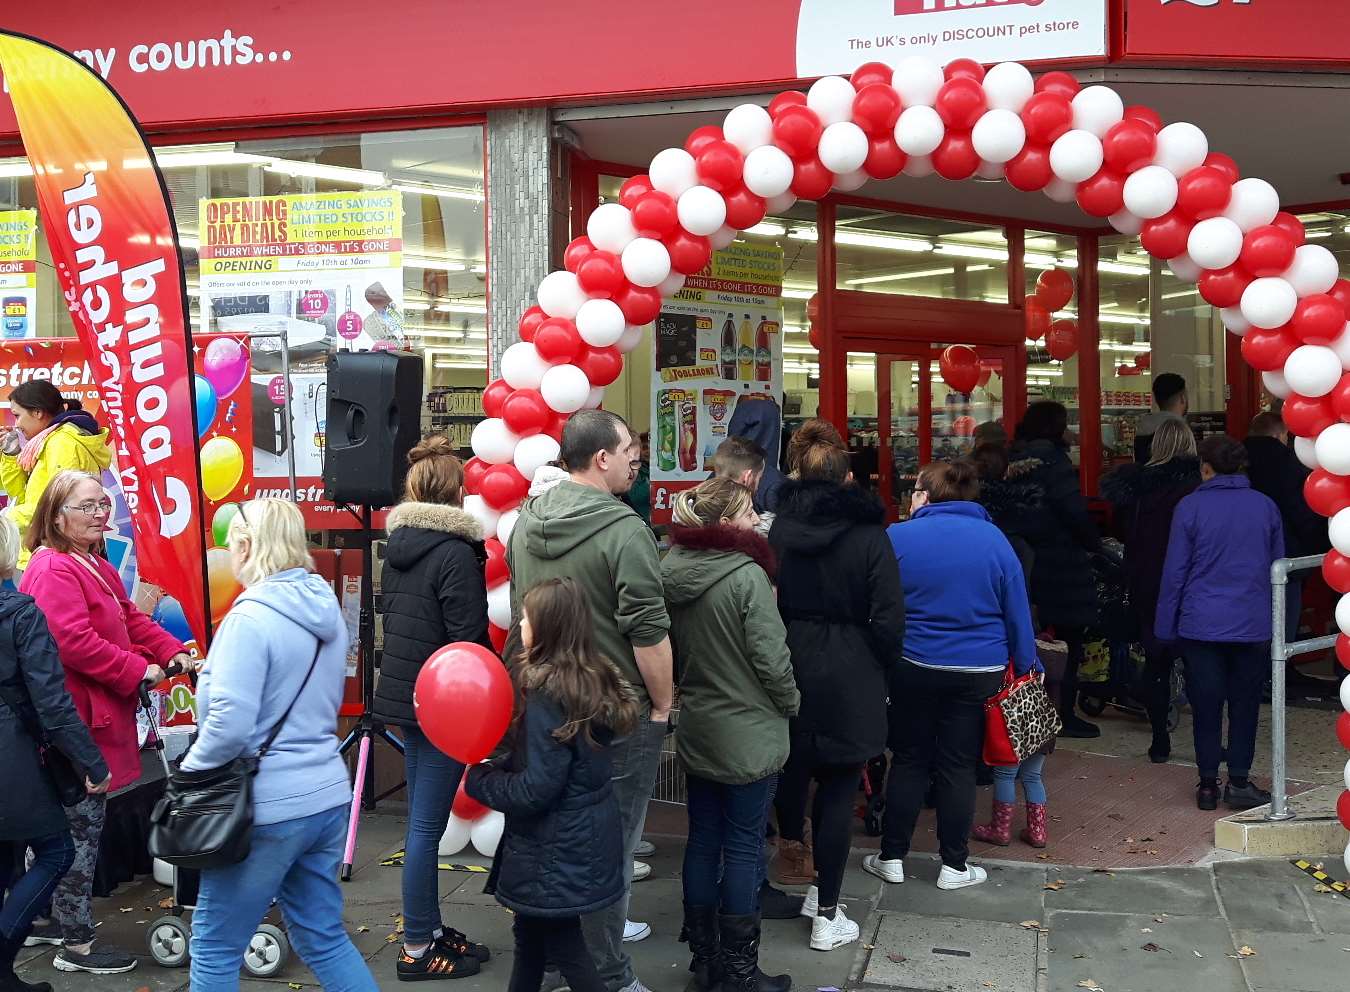 10am and the crowds are allowed in at Poundstretcher's new store in Sheerness this morning